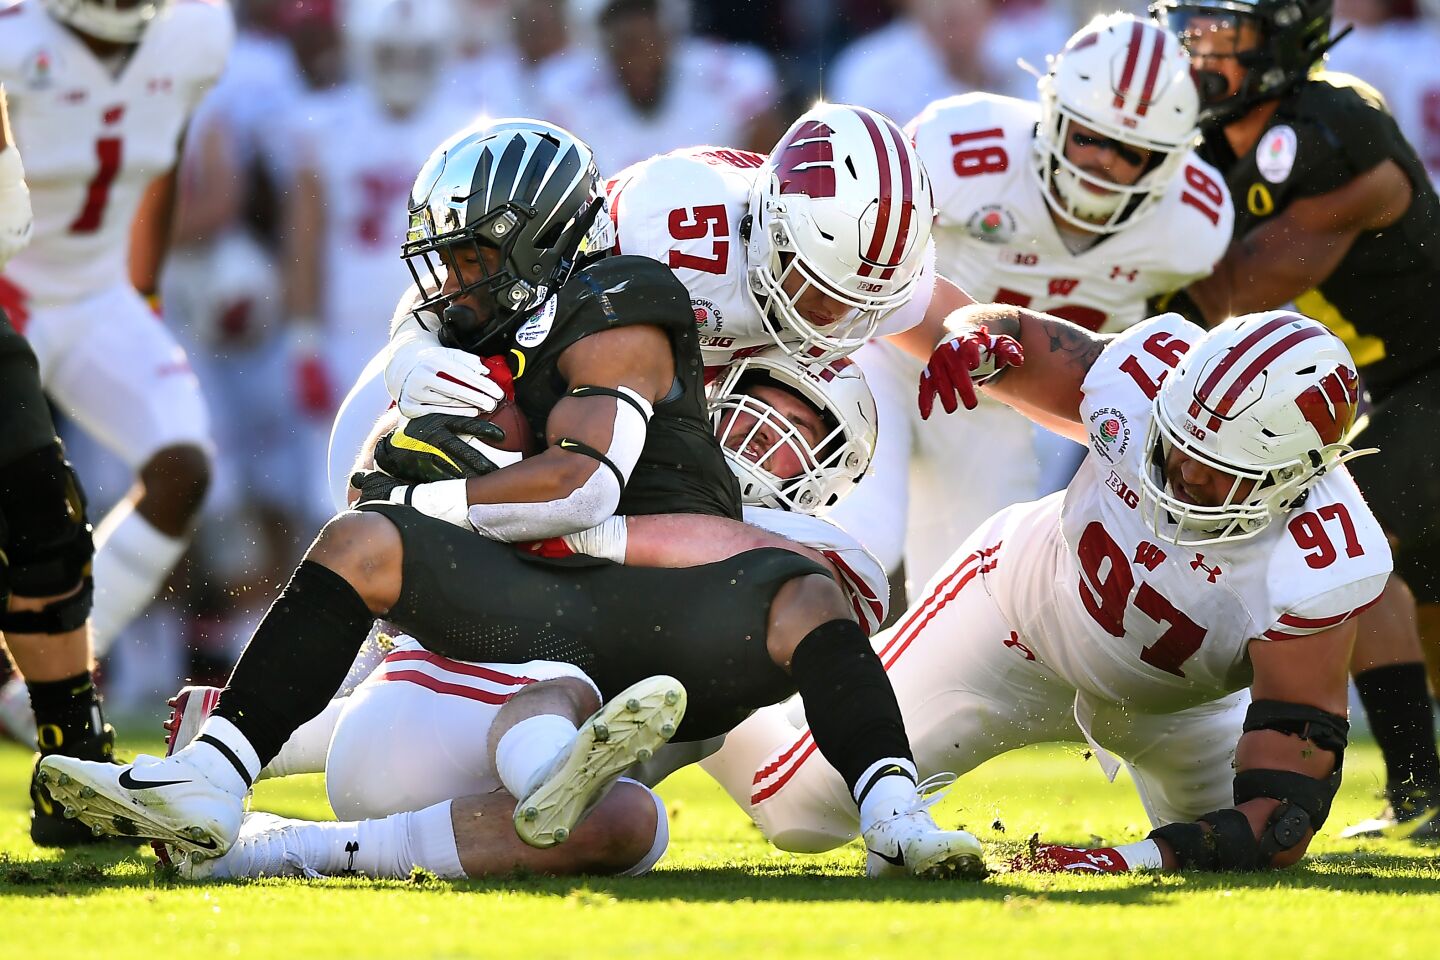 Oregon running back CJ Verdell is stopped by the Wisconsin defense in the first quarter at the Rose Bowl.